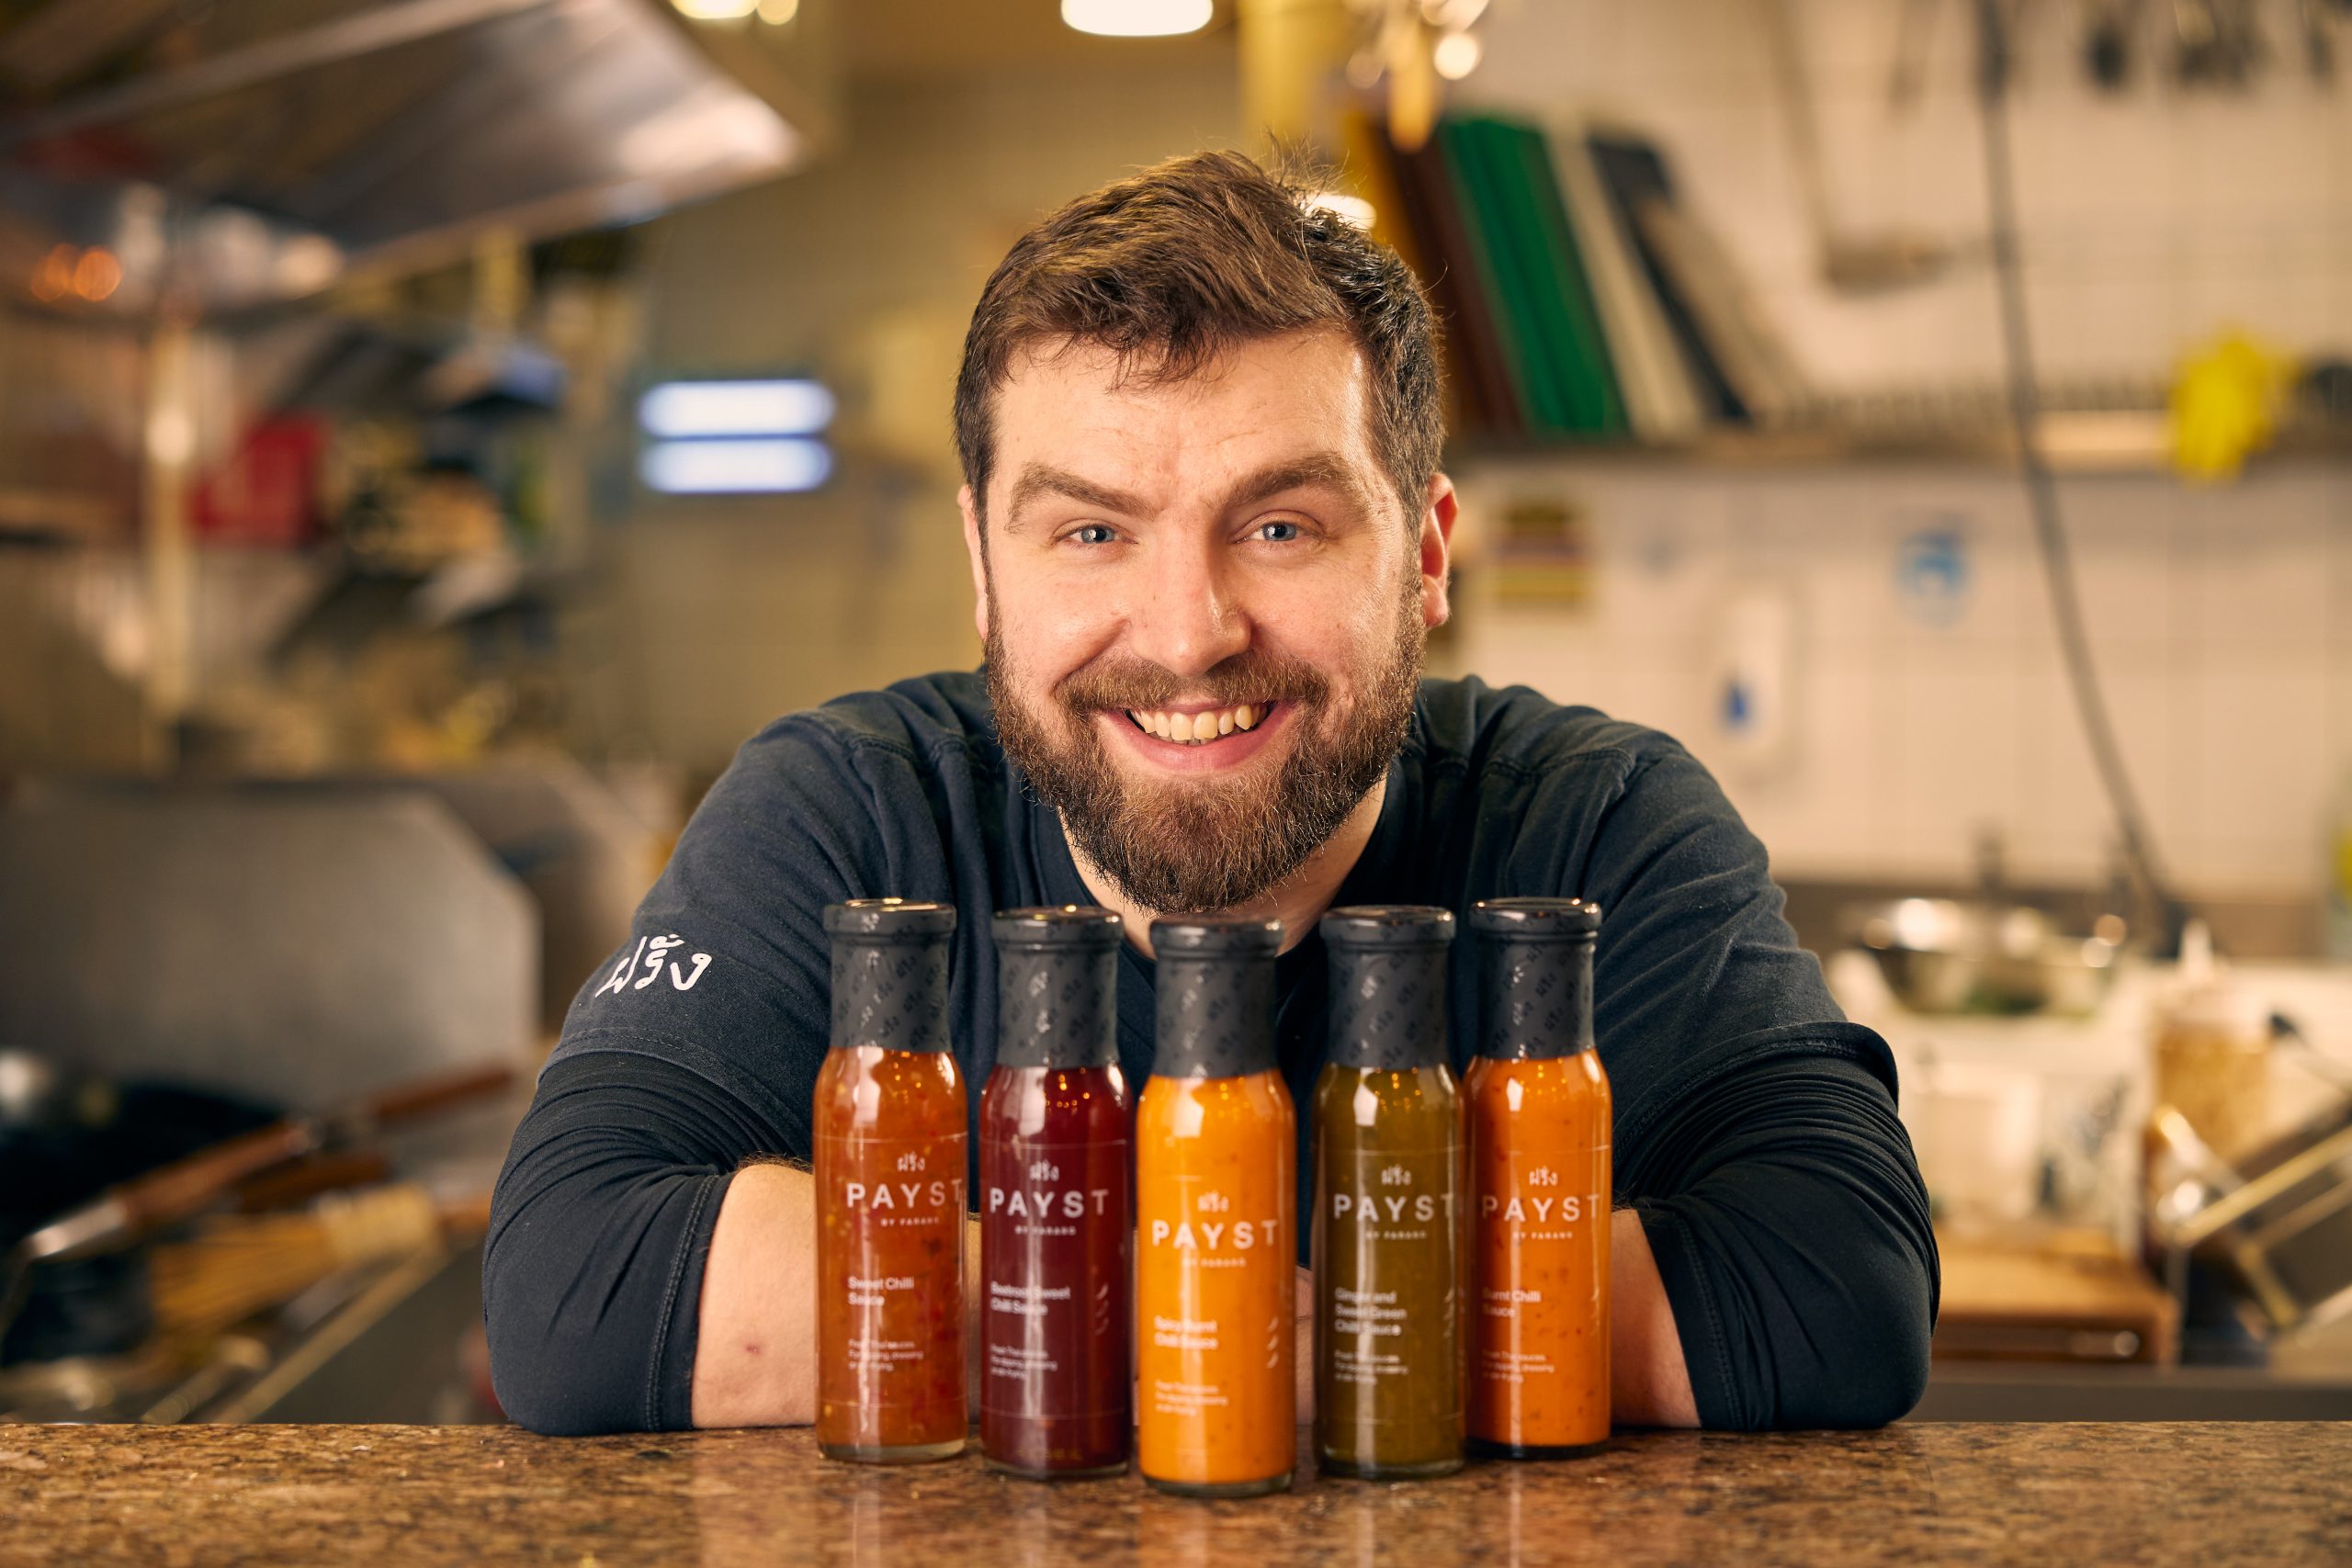 Payst: Award-winning chef Sebby Holmes launches new thai sauce, curry range